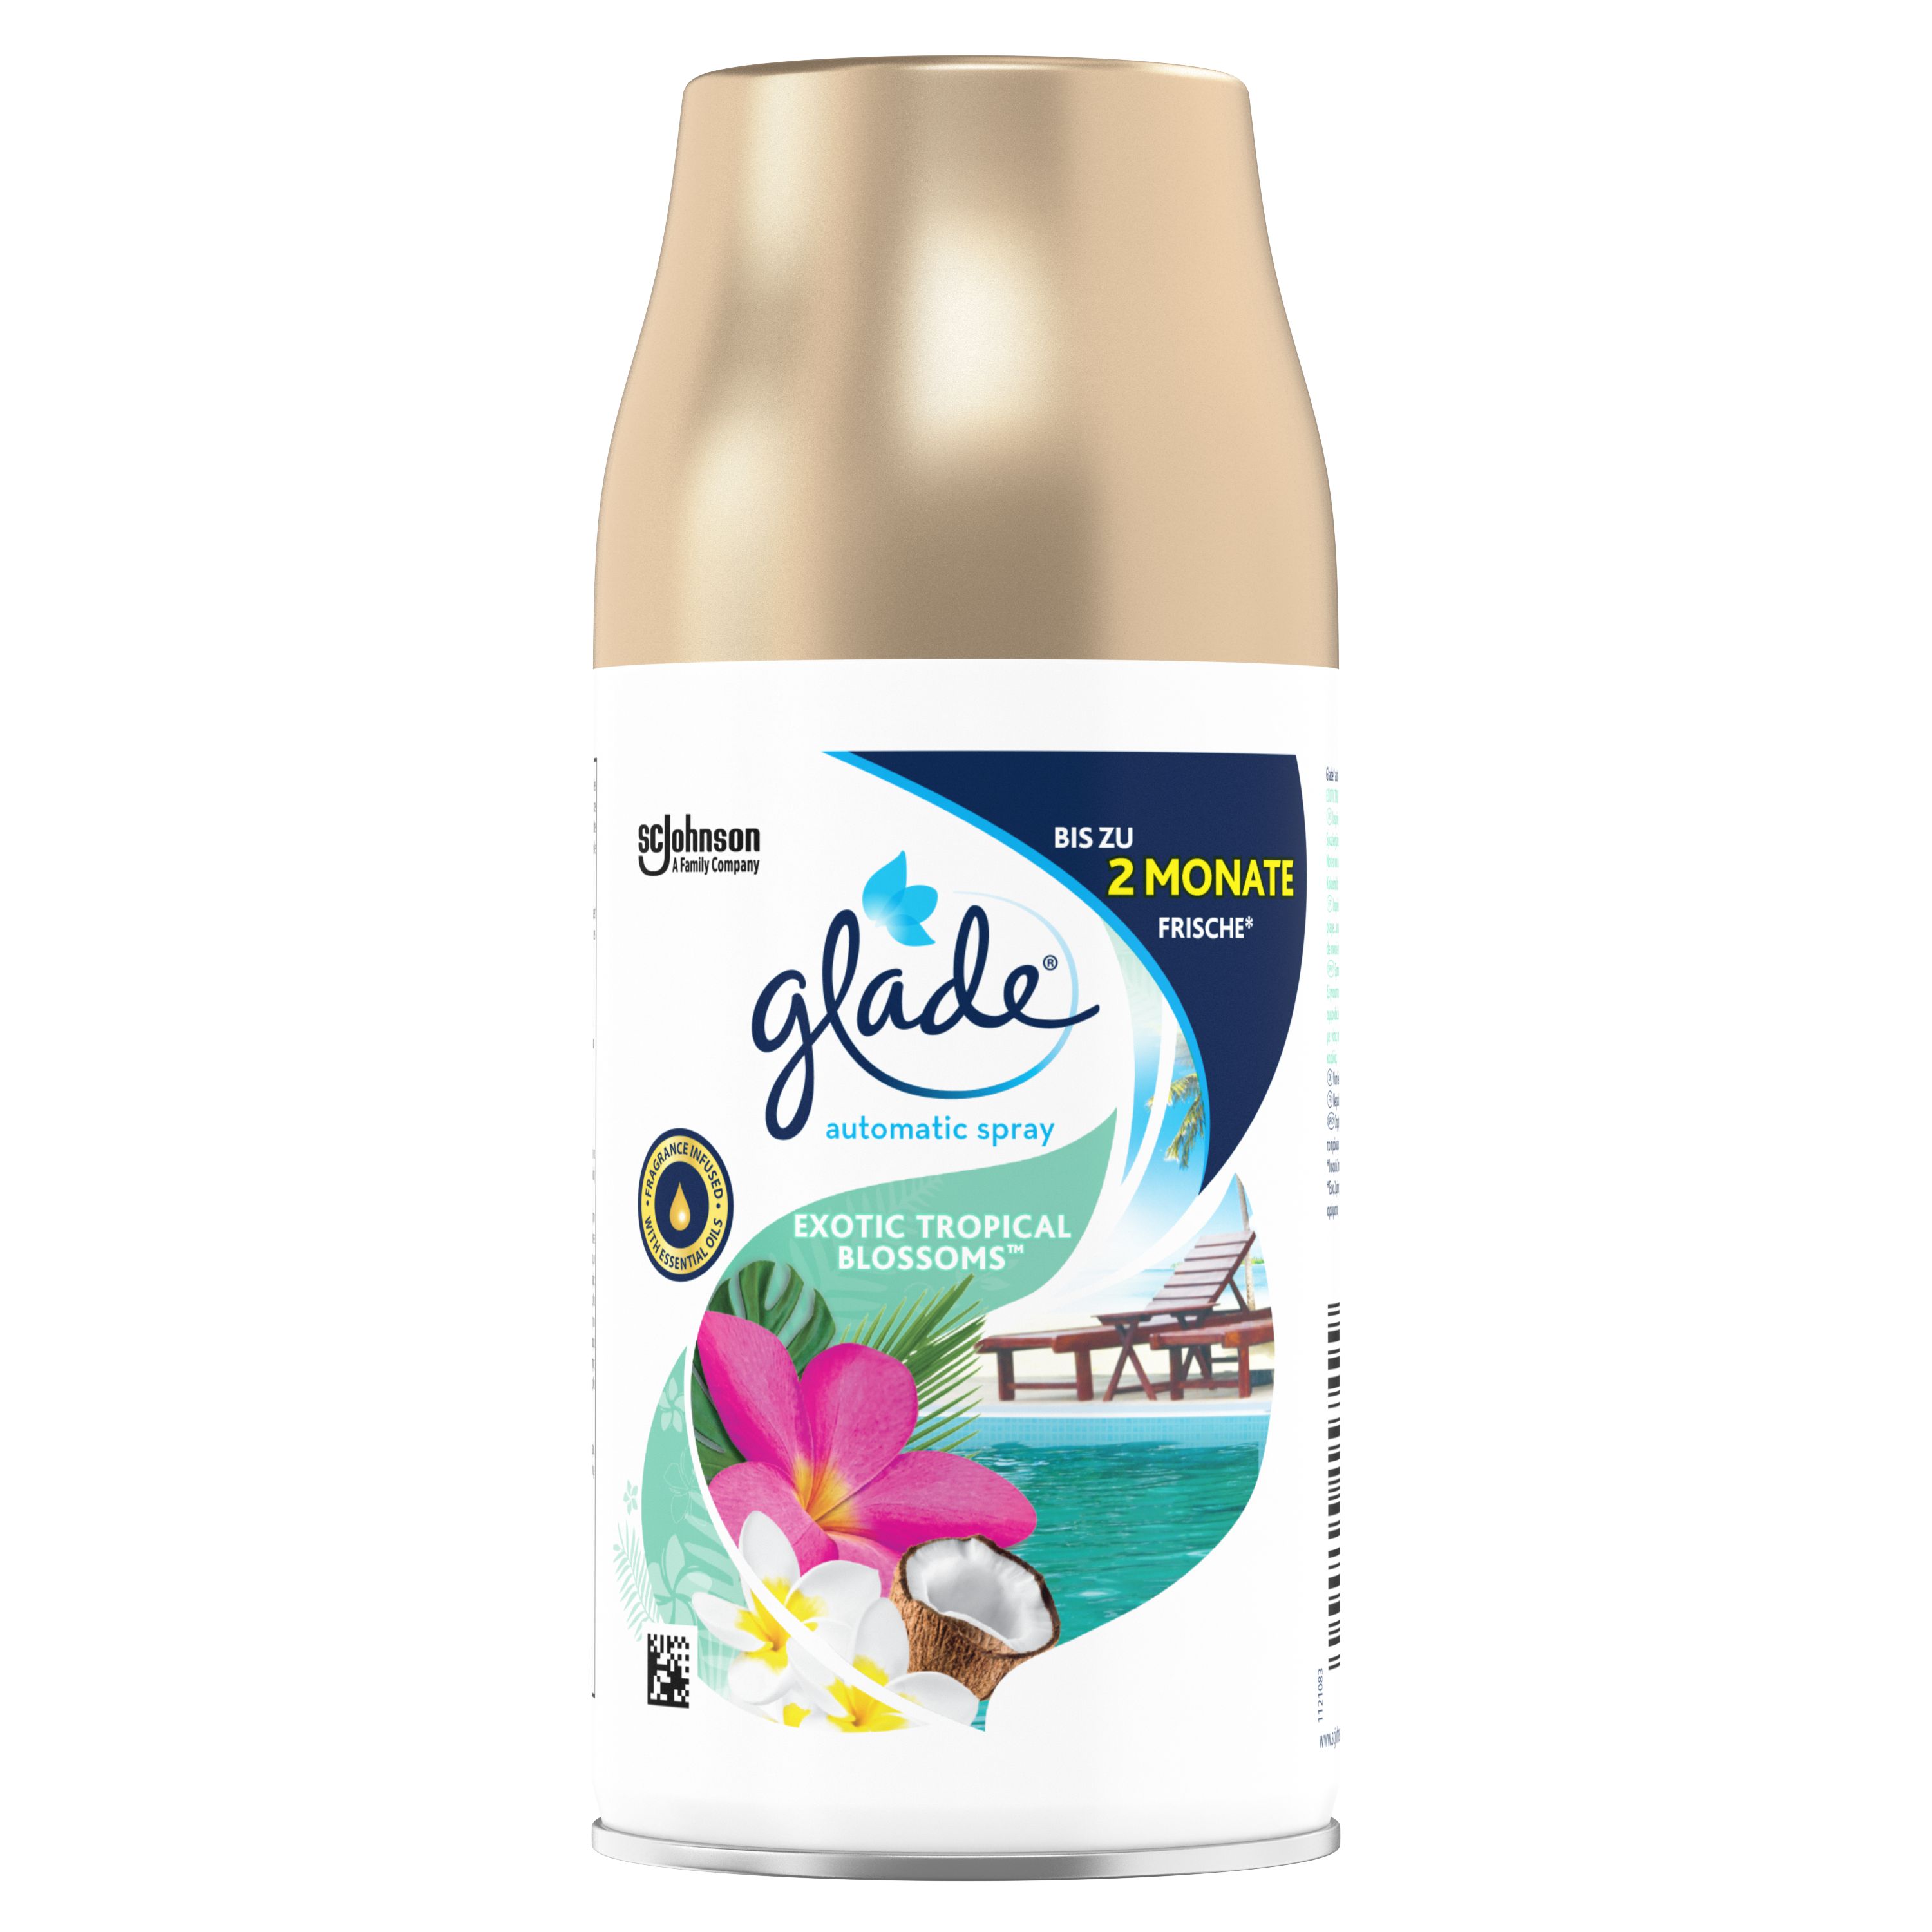 Glade® Automatic Spray Exotic Tropical Blossoms™